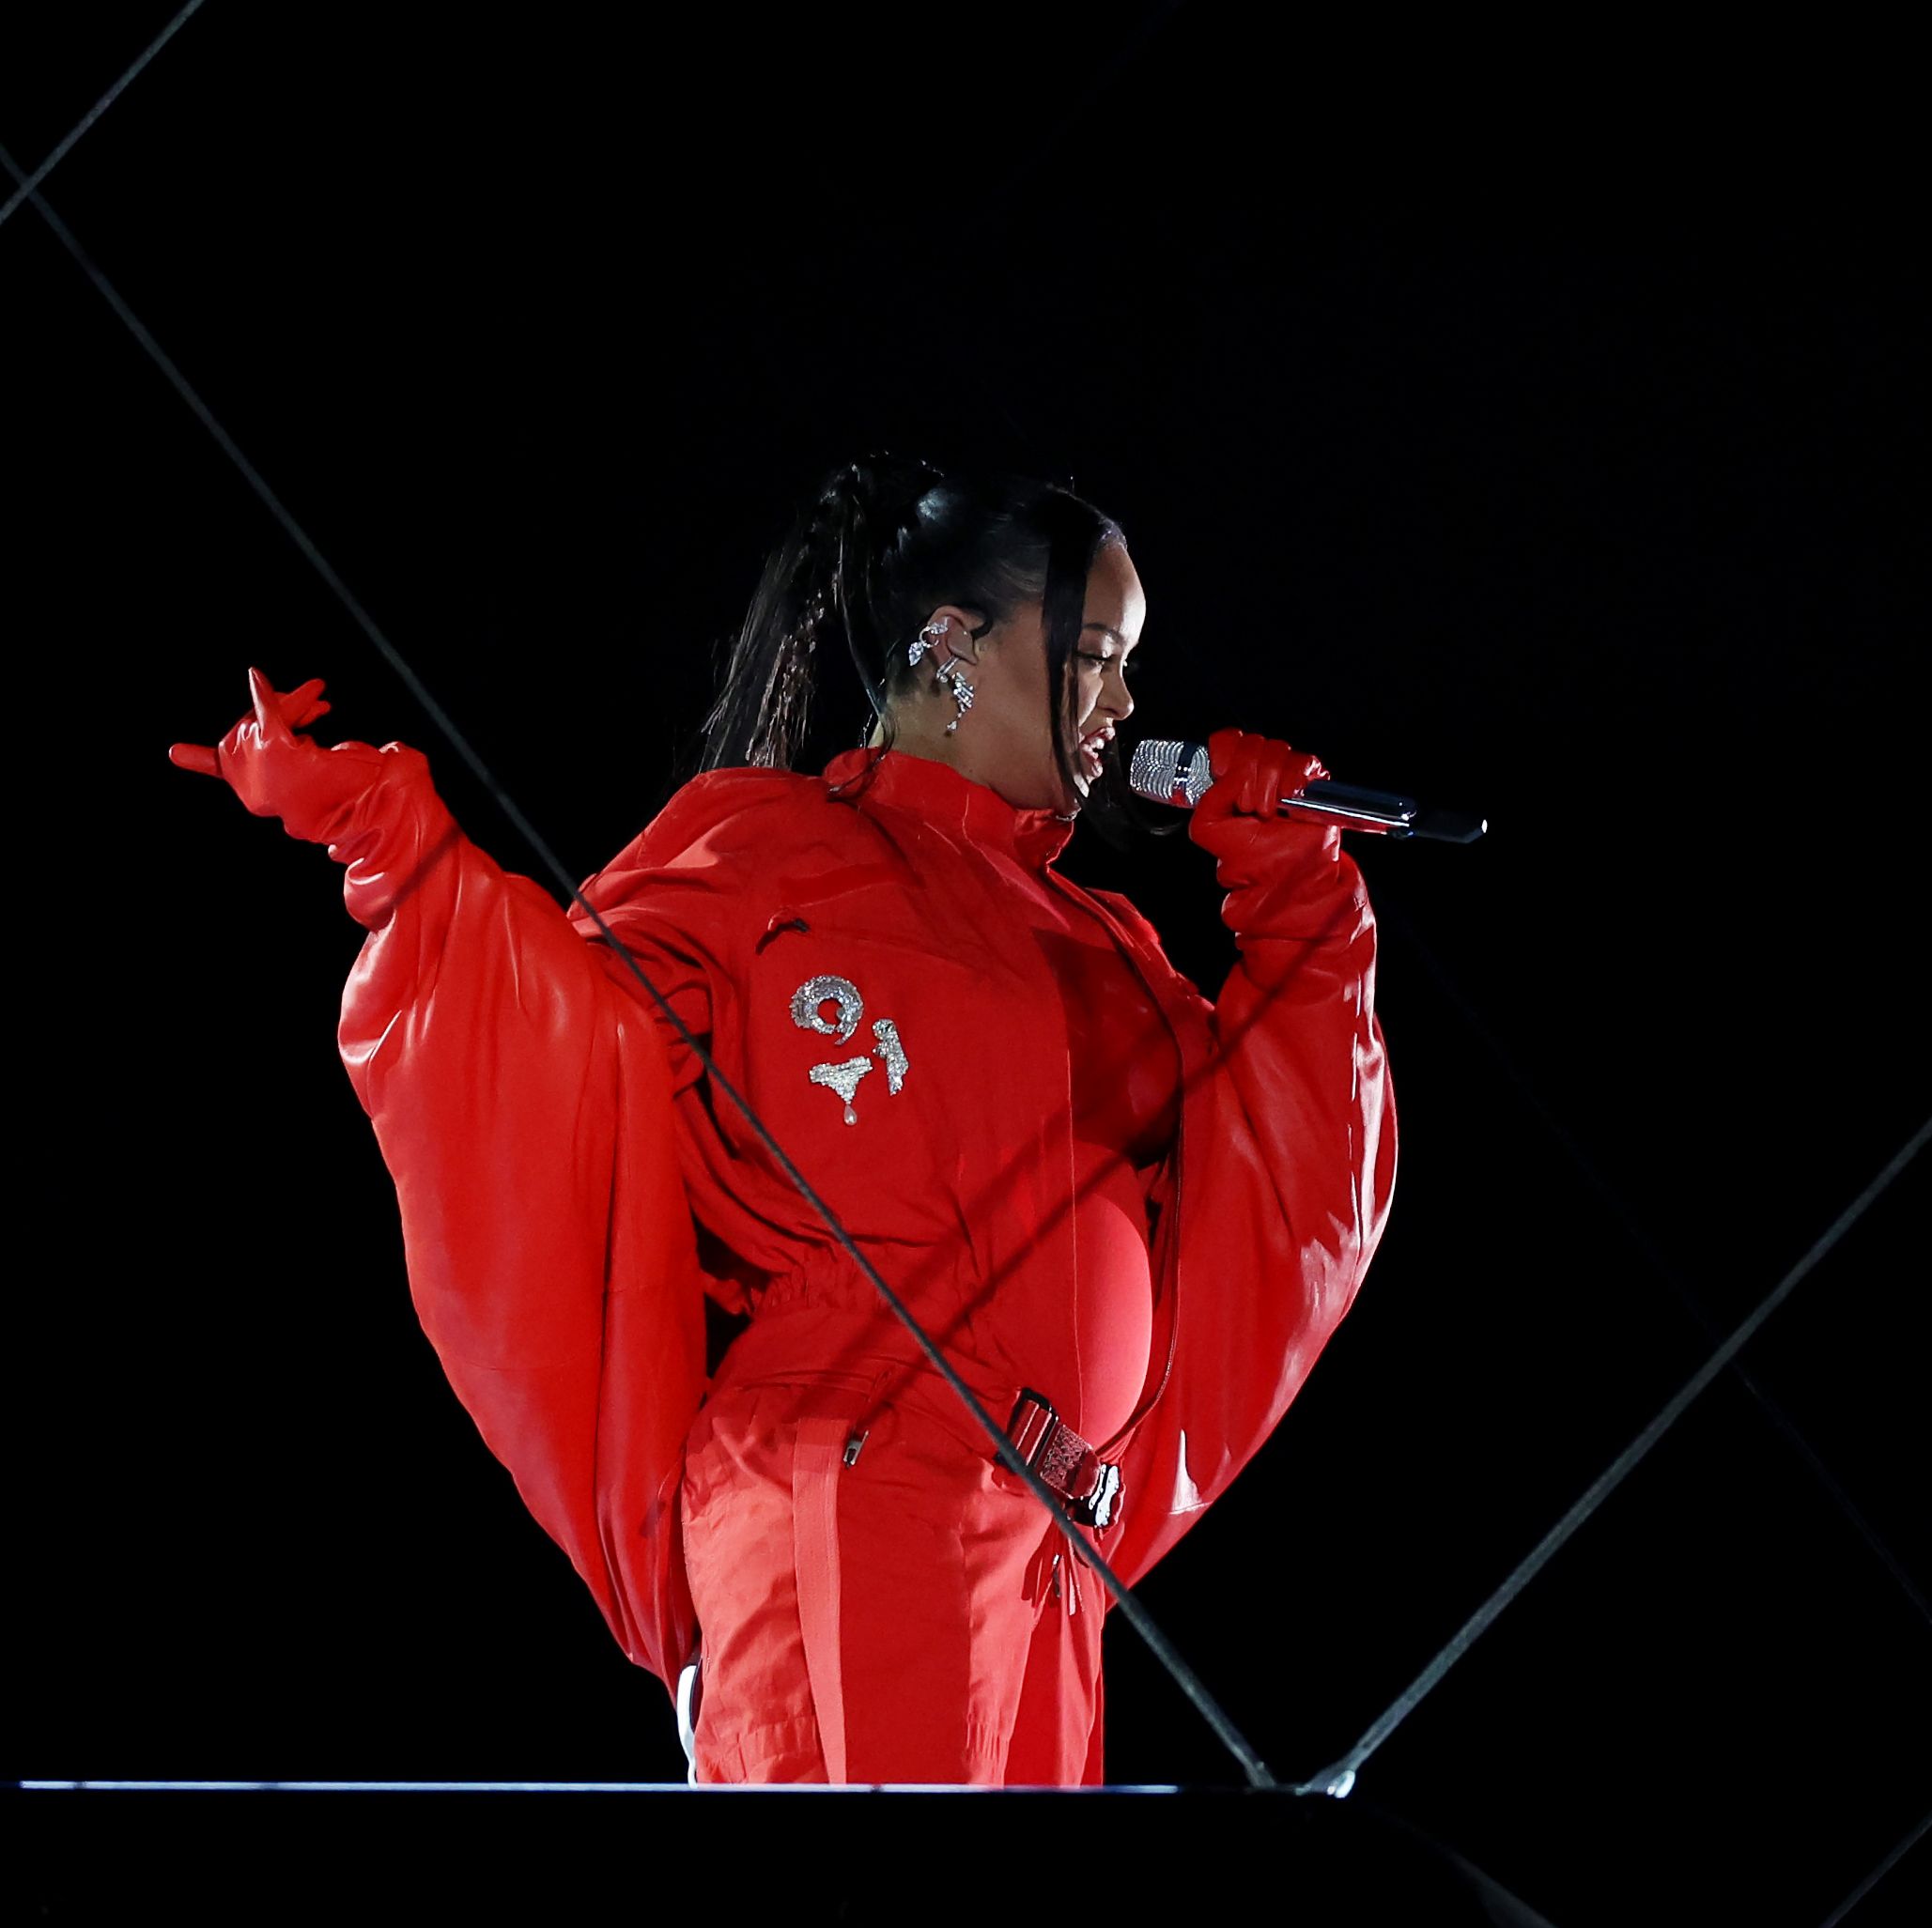 It's Official: Rihanna Confirmed Her Second Pregnancy During the Super Bowl Halftime Show